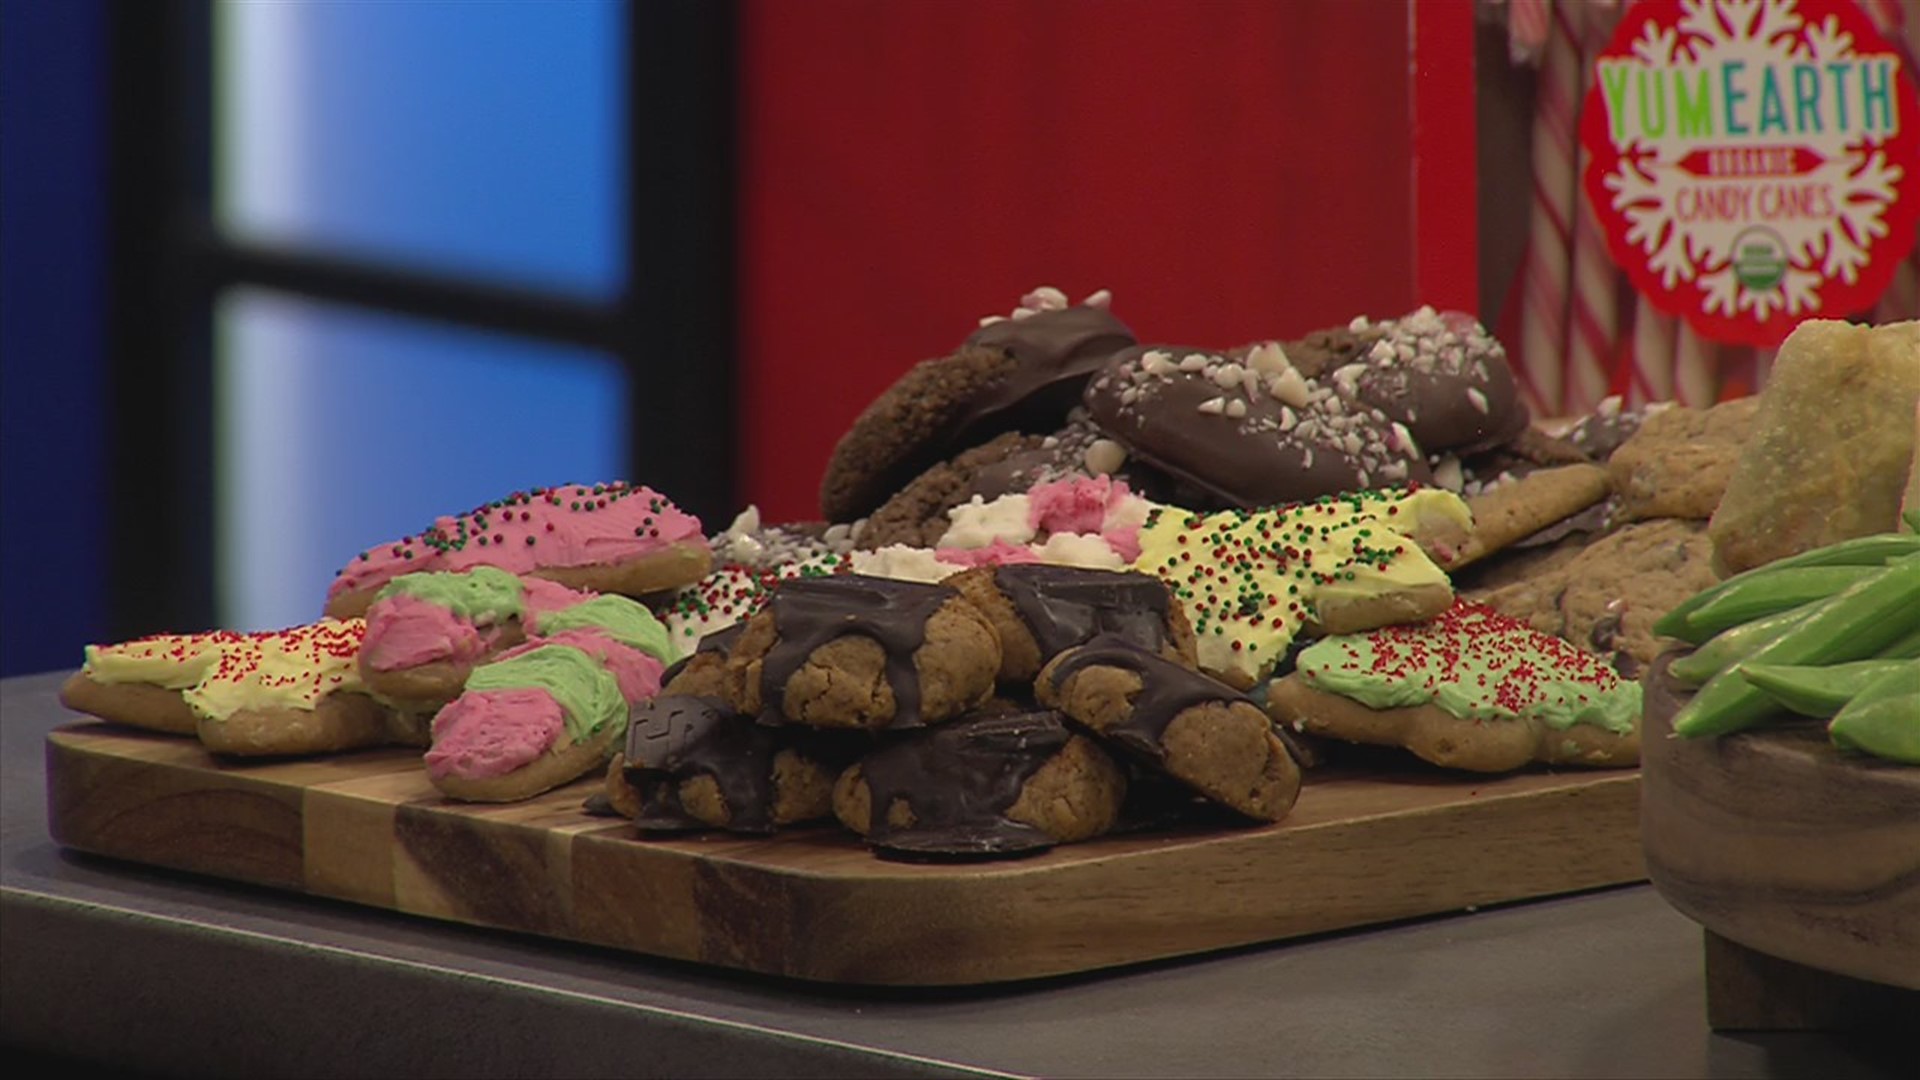 Friday, nutritionist Kara Swanson showed us some healthier and gluten free options to fill your bellies this holiday season.